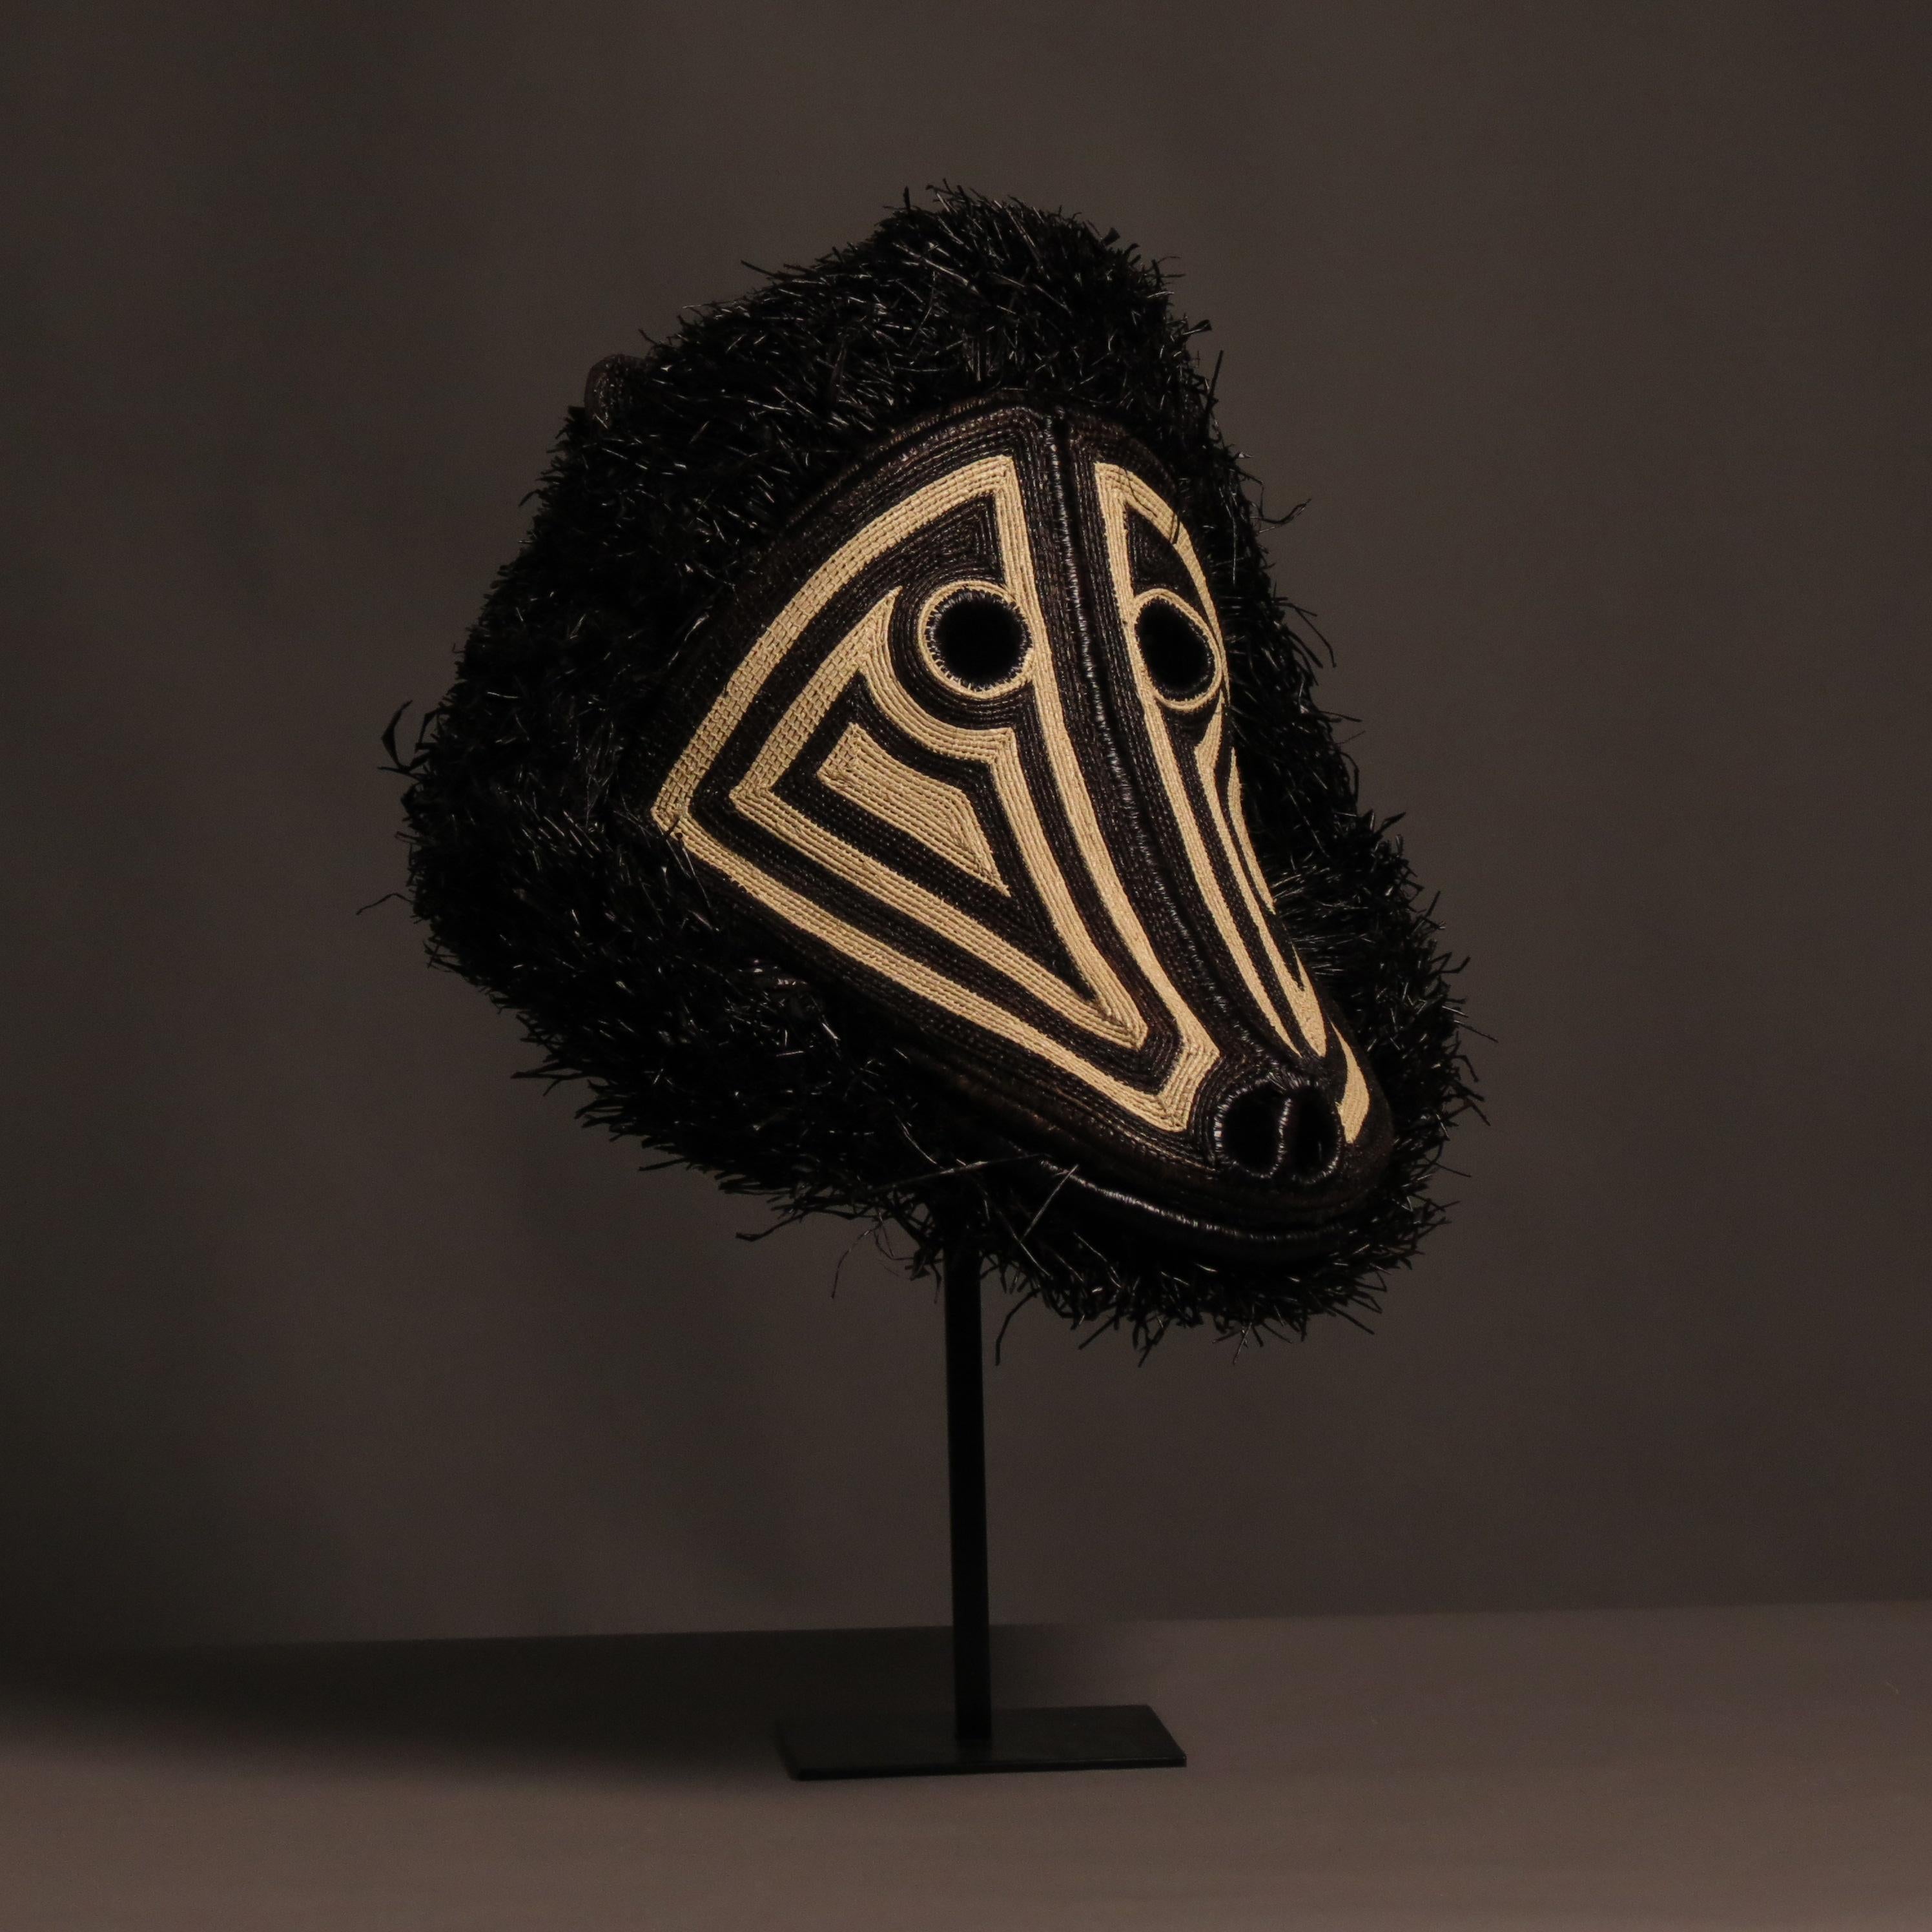 Extraordinary as works of art and decoration, this mask come from the Shamanic beliefs and rituals of the Central American tribes.
The Indigenous people divide the world in two, a visible world and a parallel world which is invisible.
These